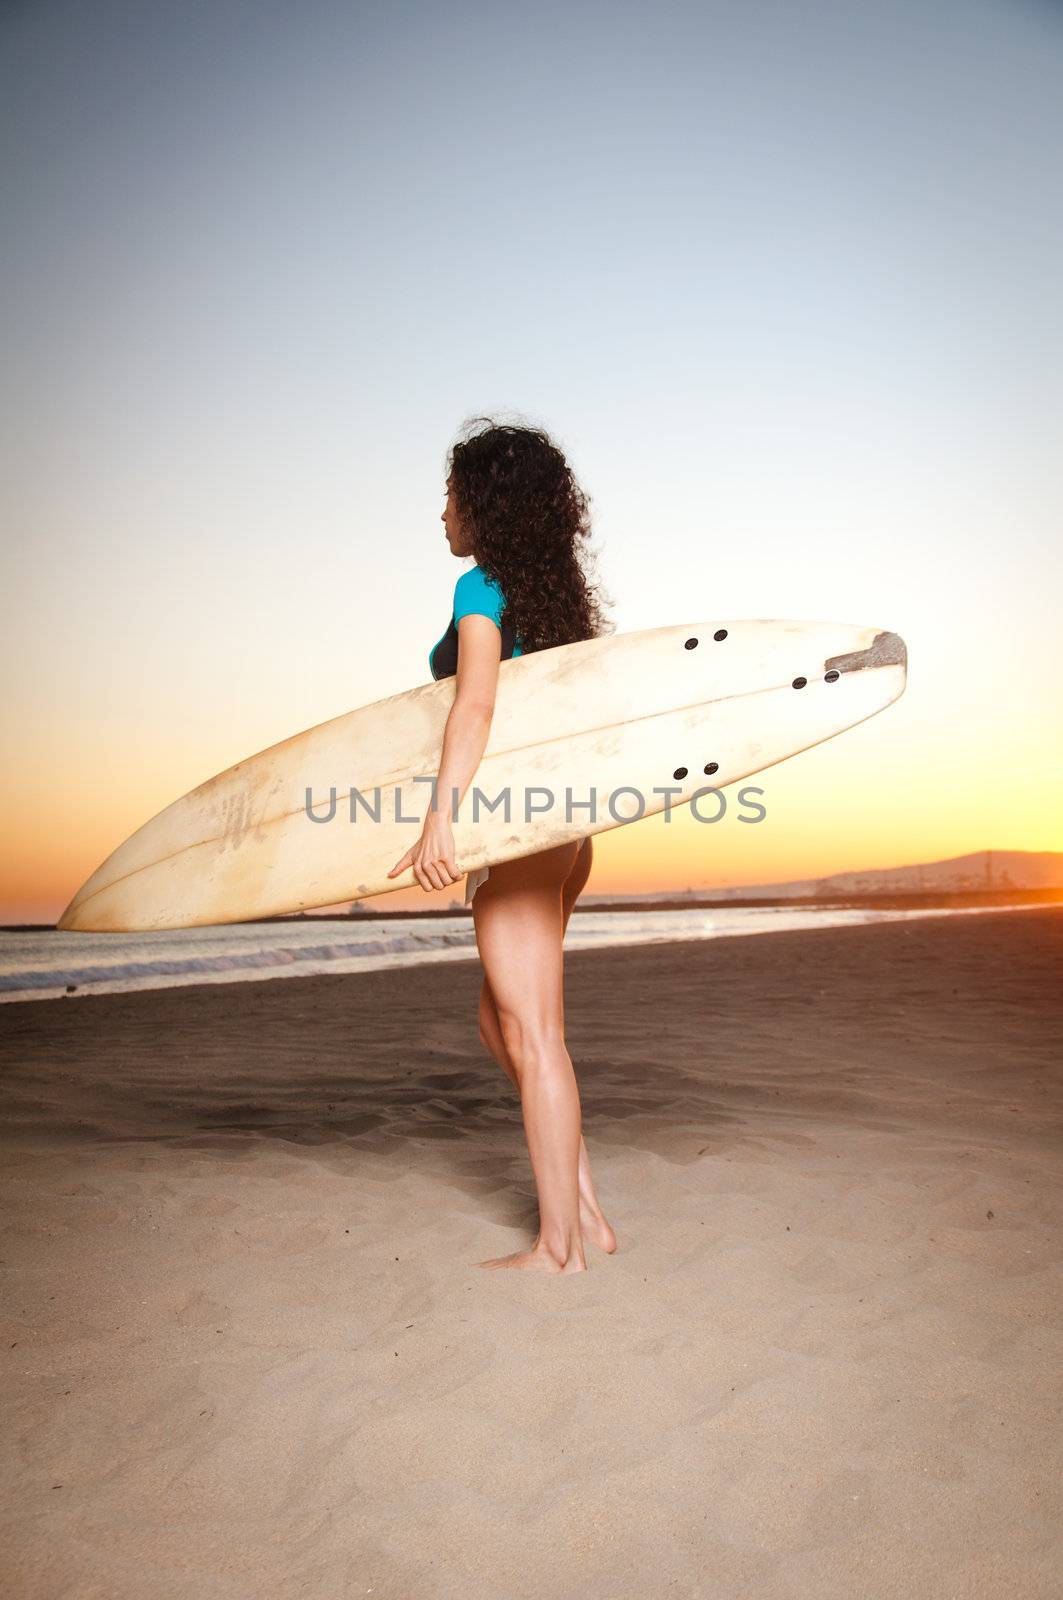 Beautiful model wearing a white bikini and surfer outft holding a surfboard during sunset by the beach